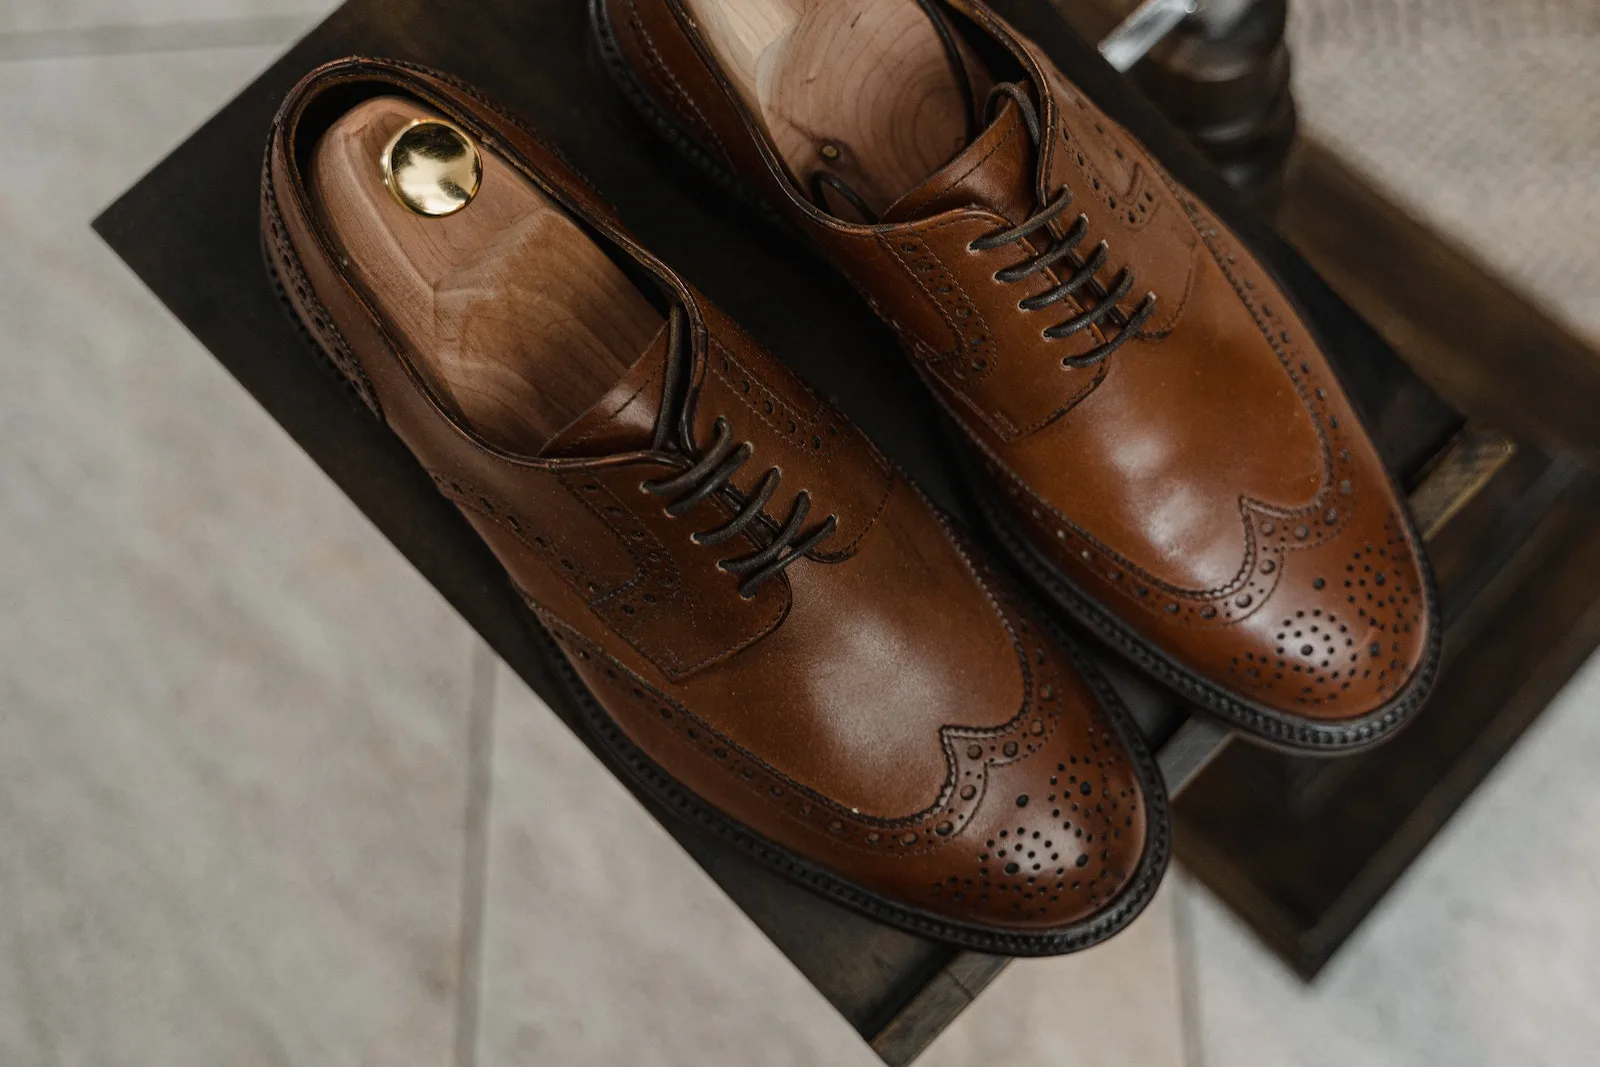 The Difference Between Oxford and Derby Shoes